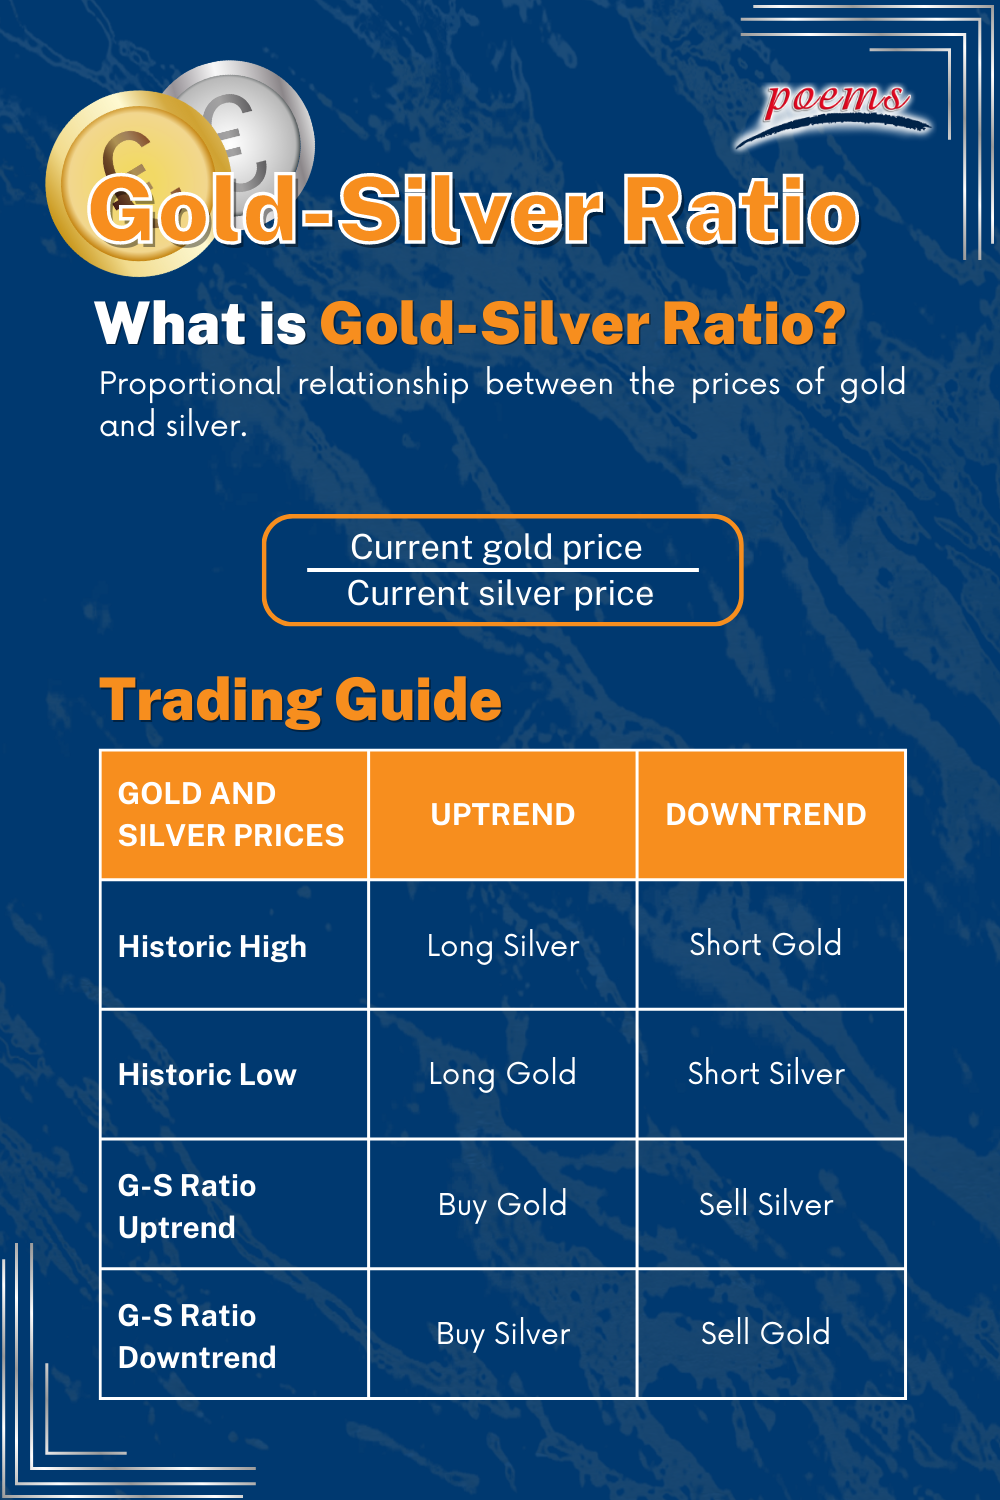 Trading off the Gold-Silver Ratio